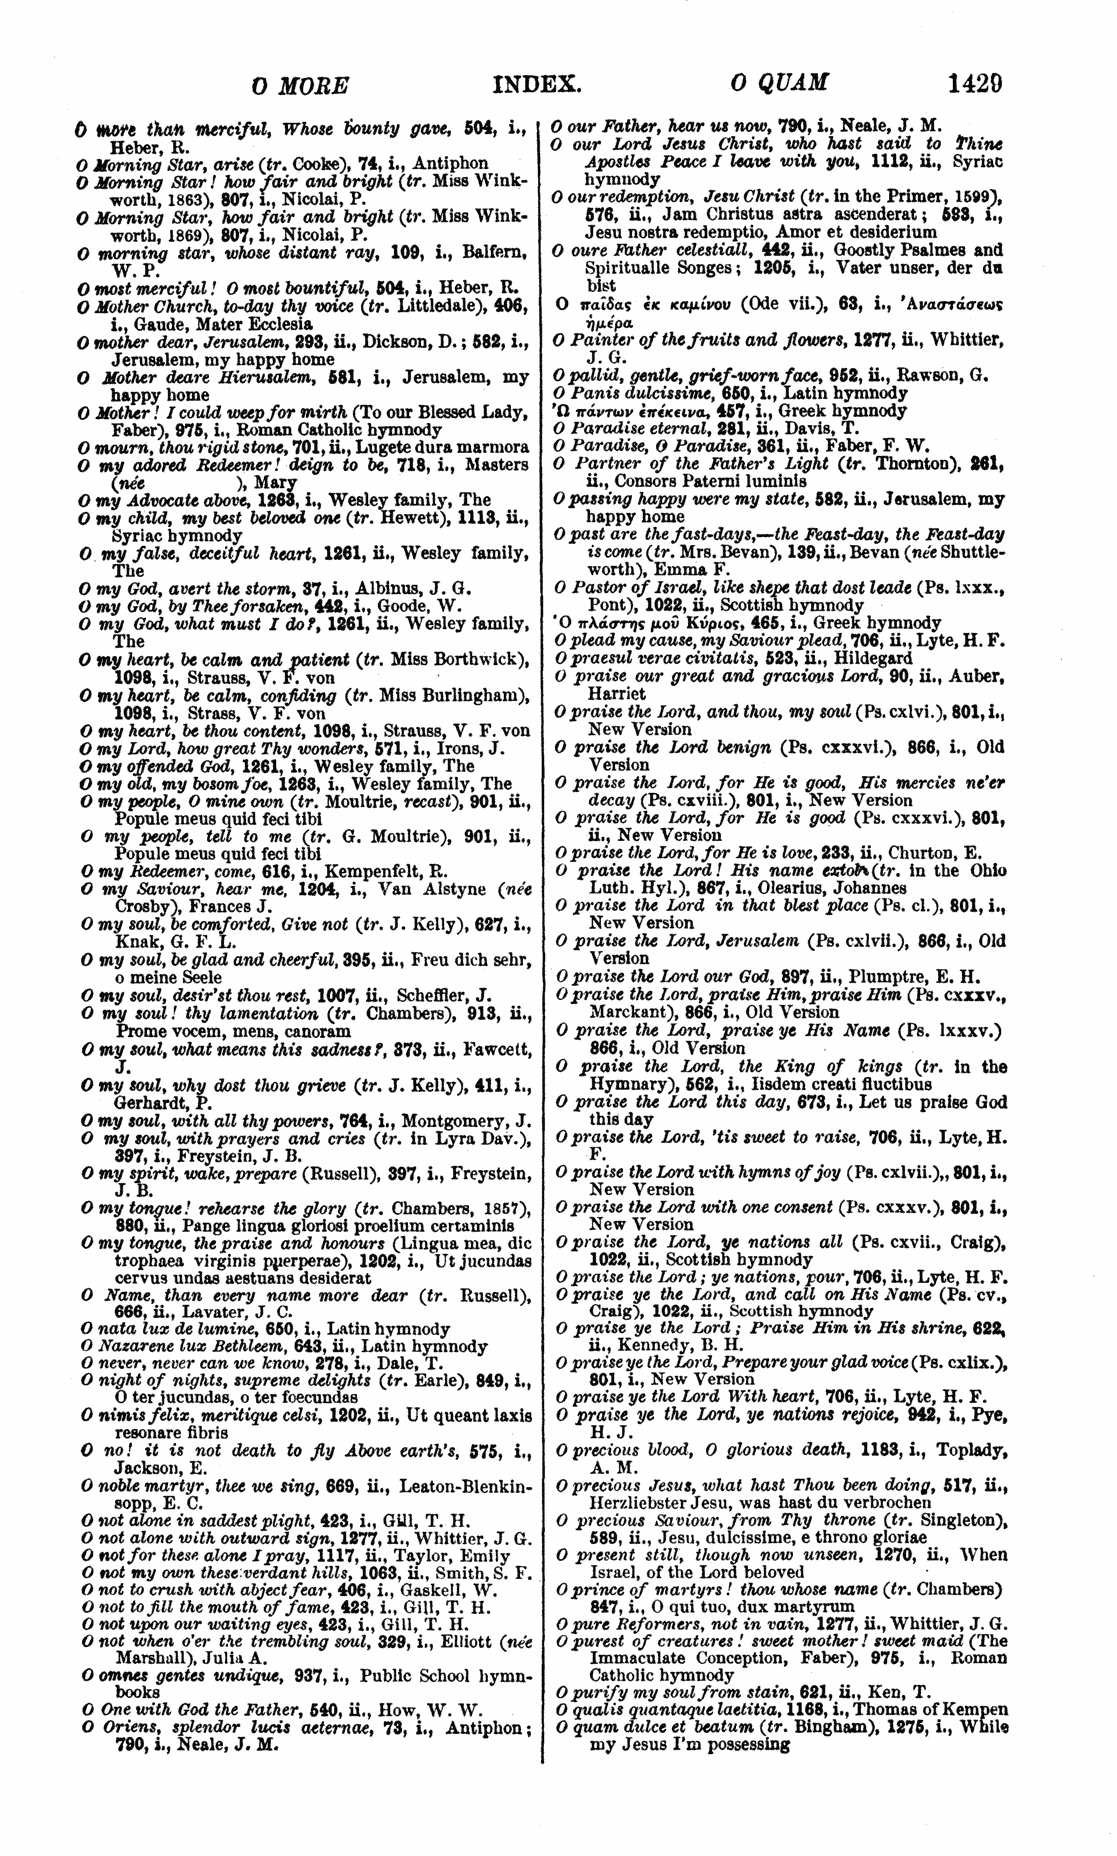 Image of page 1429